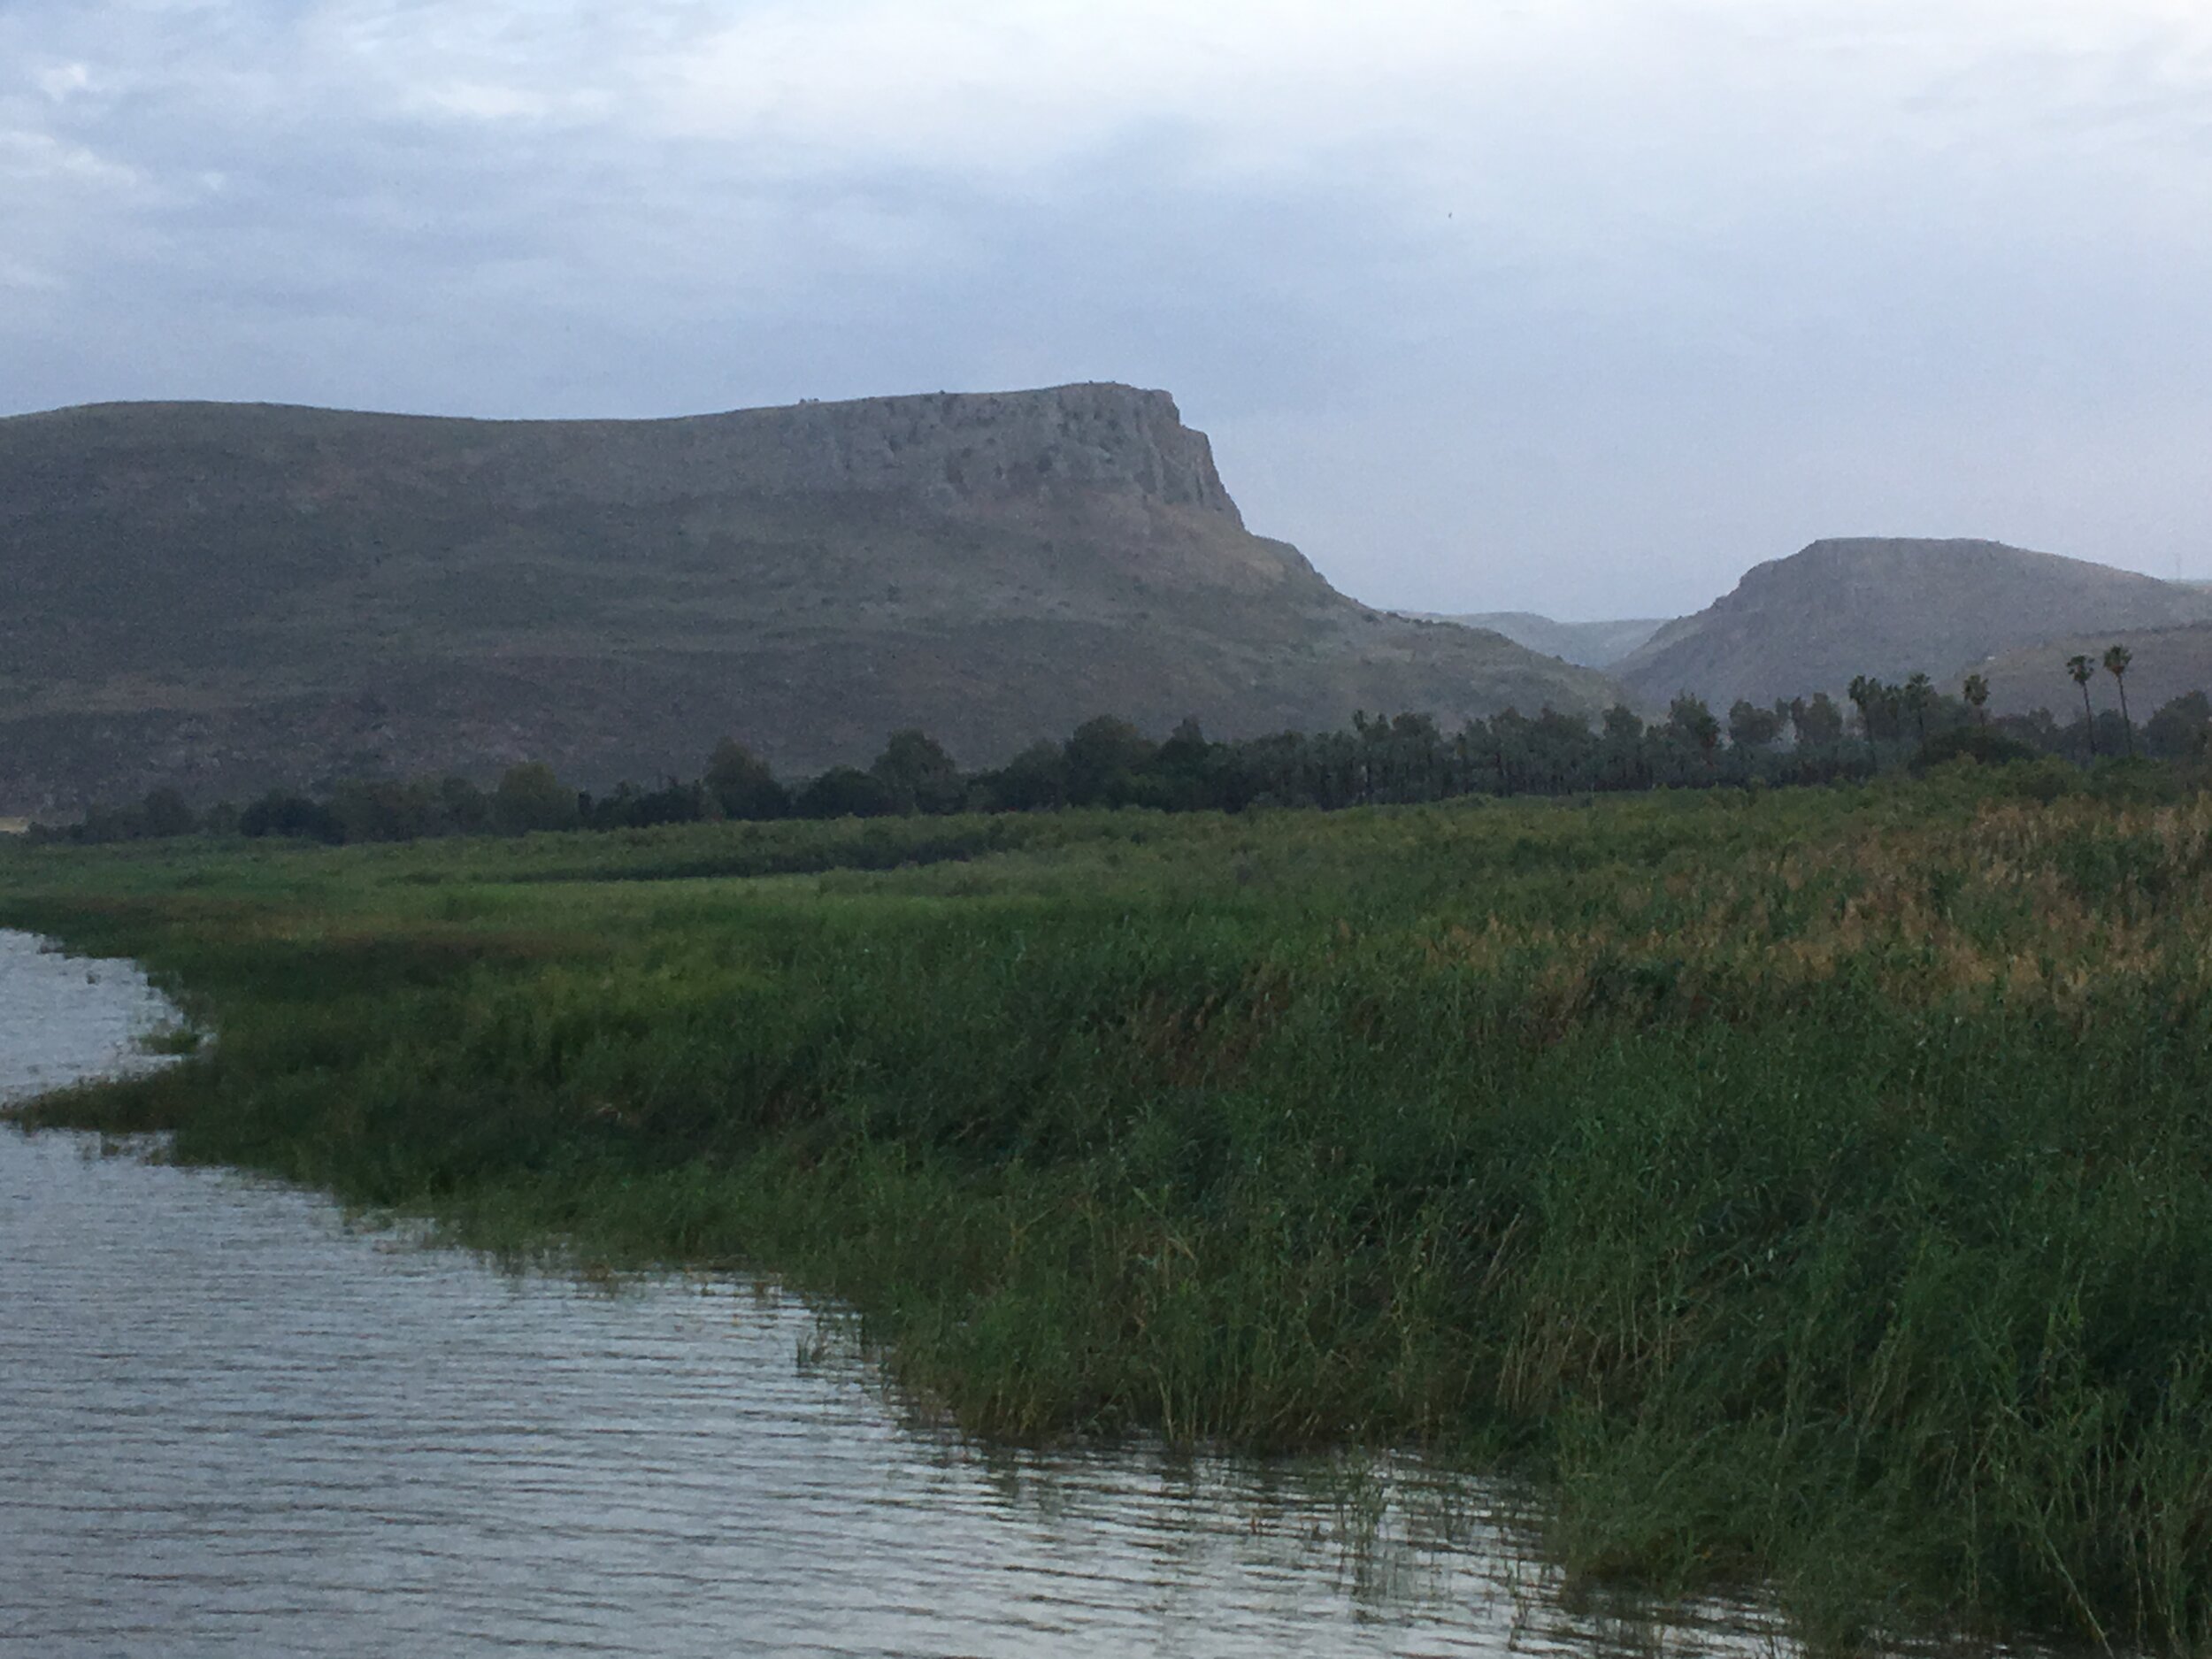  Mount Arbel can be seen in the distance 